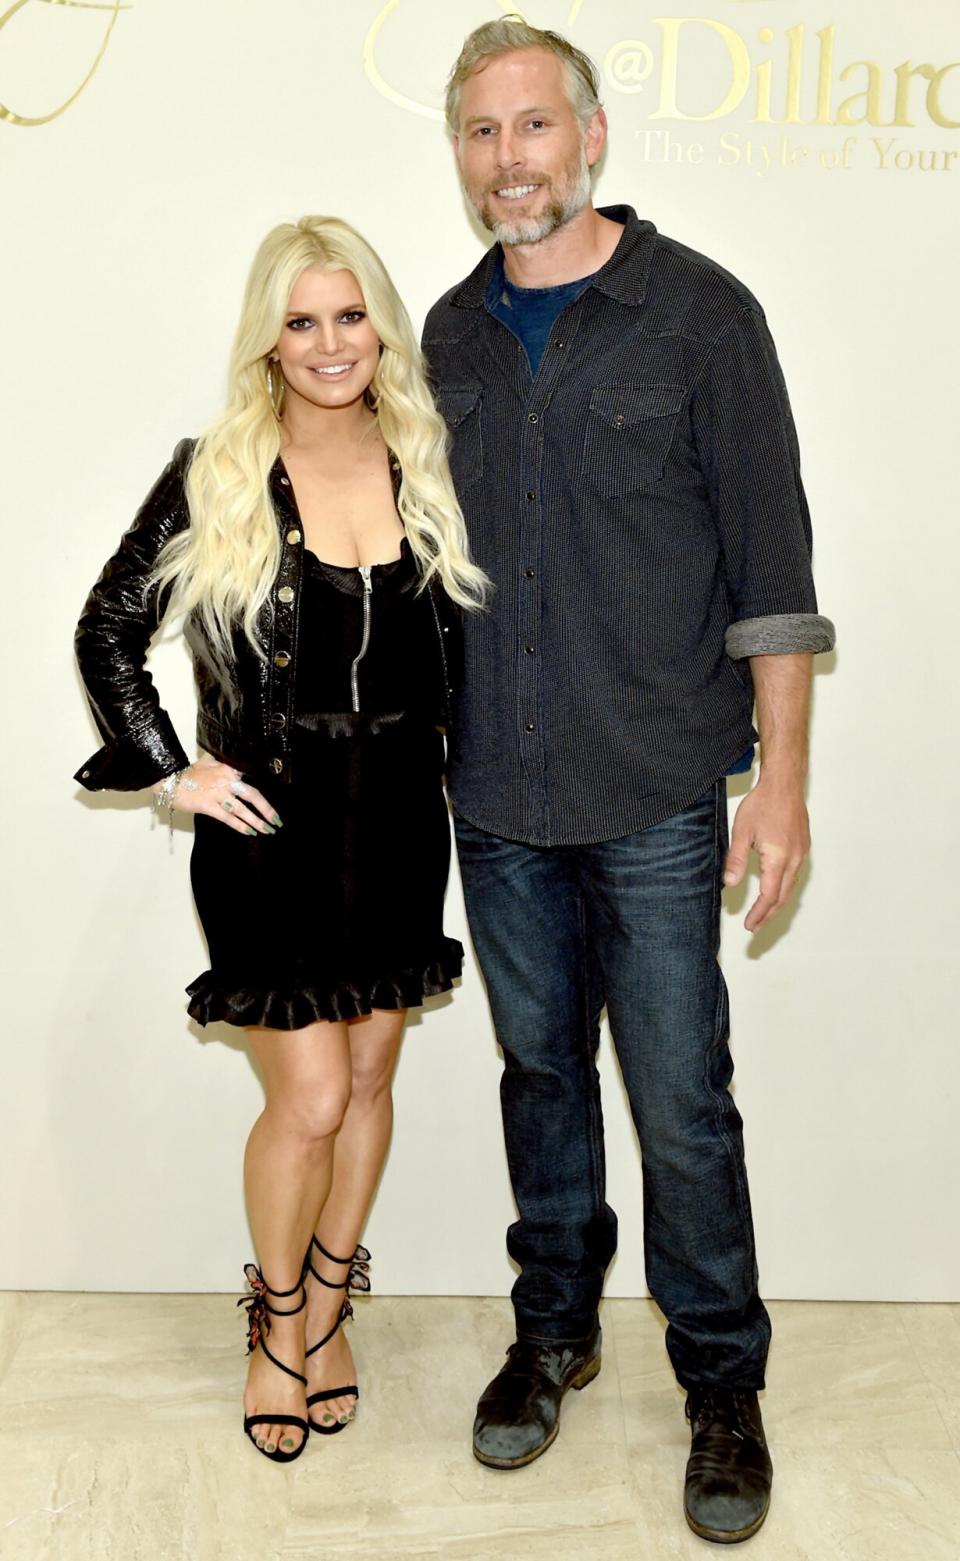 Jessica Simpson and Eric Johnson take photos during a spring style event in Dillards at The Mall at Green Hills hosted by Jessica Simpson on April 7, 2018 in Nashville, Tennesse